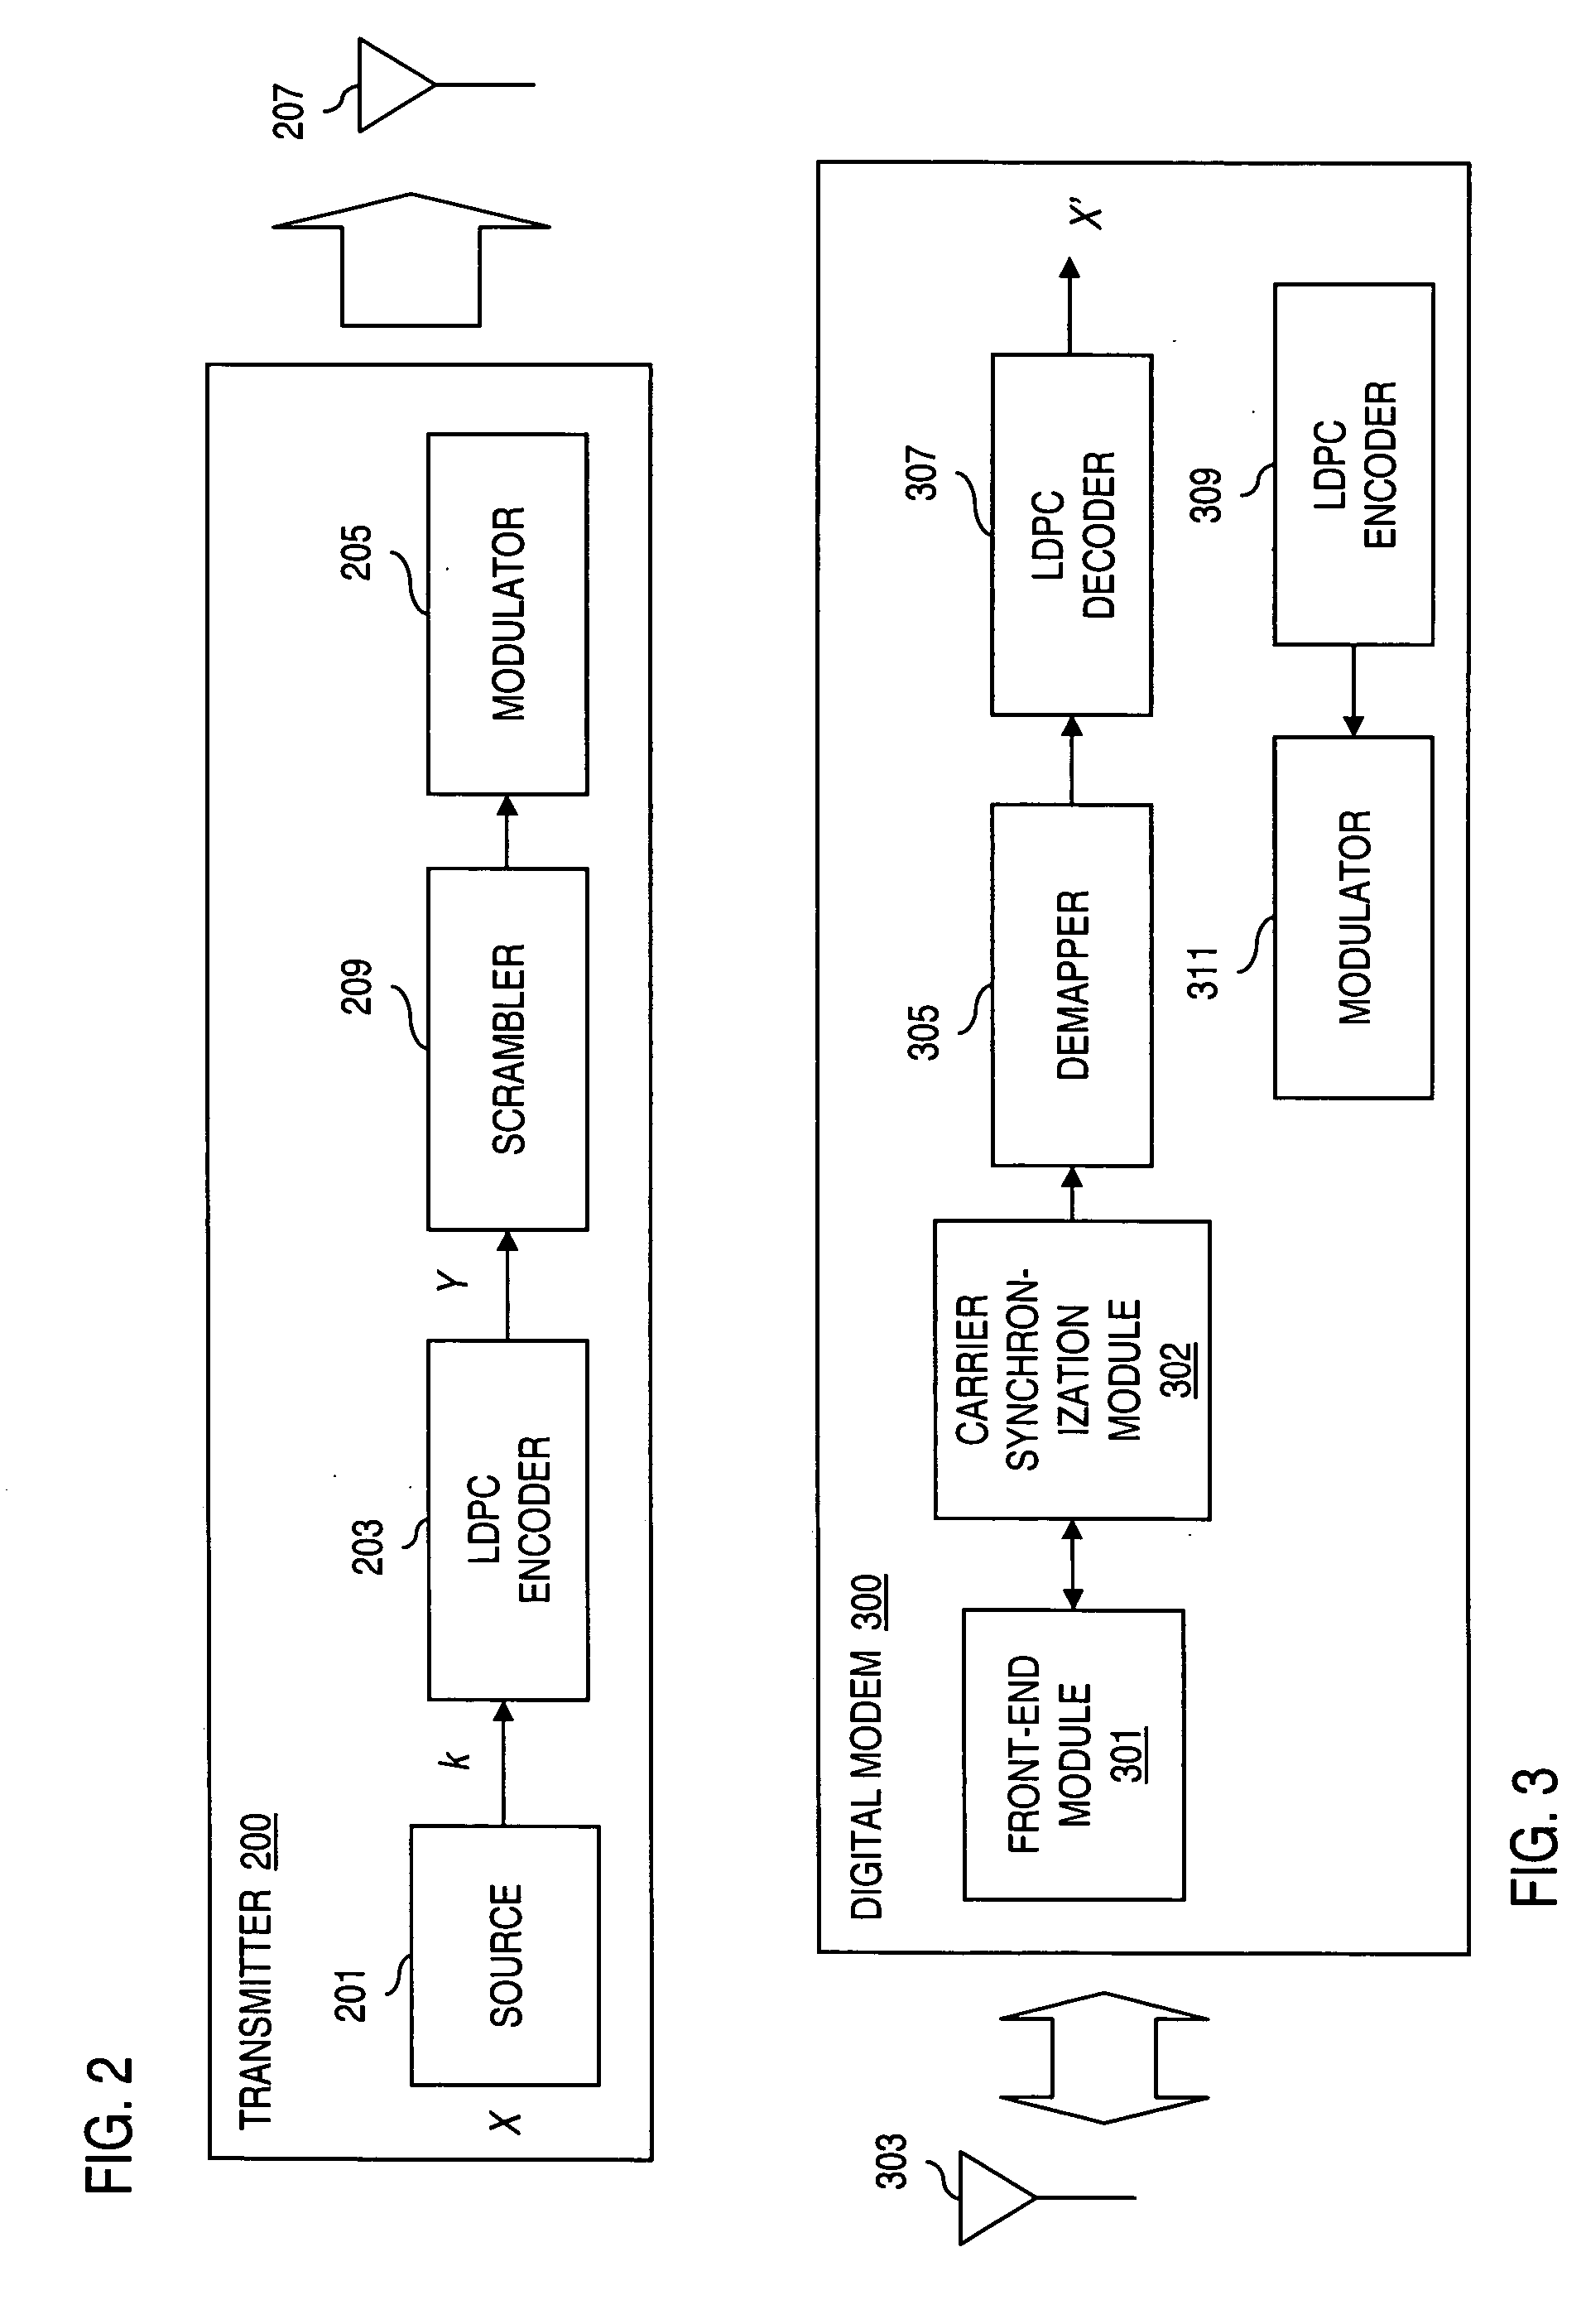 Method and apparatus for minimizing co-channel interference